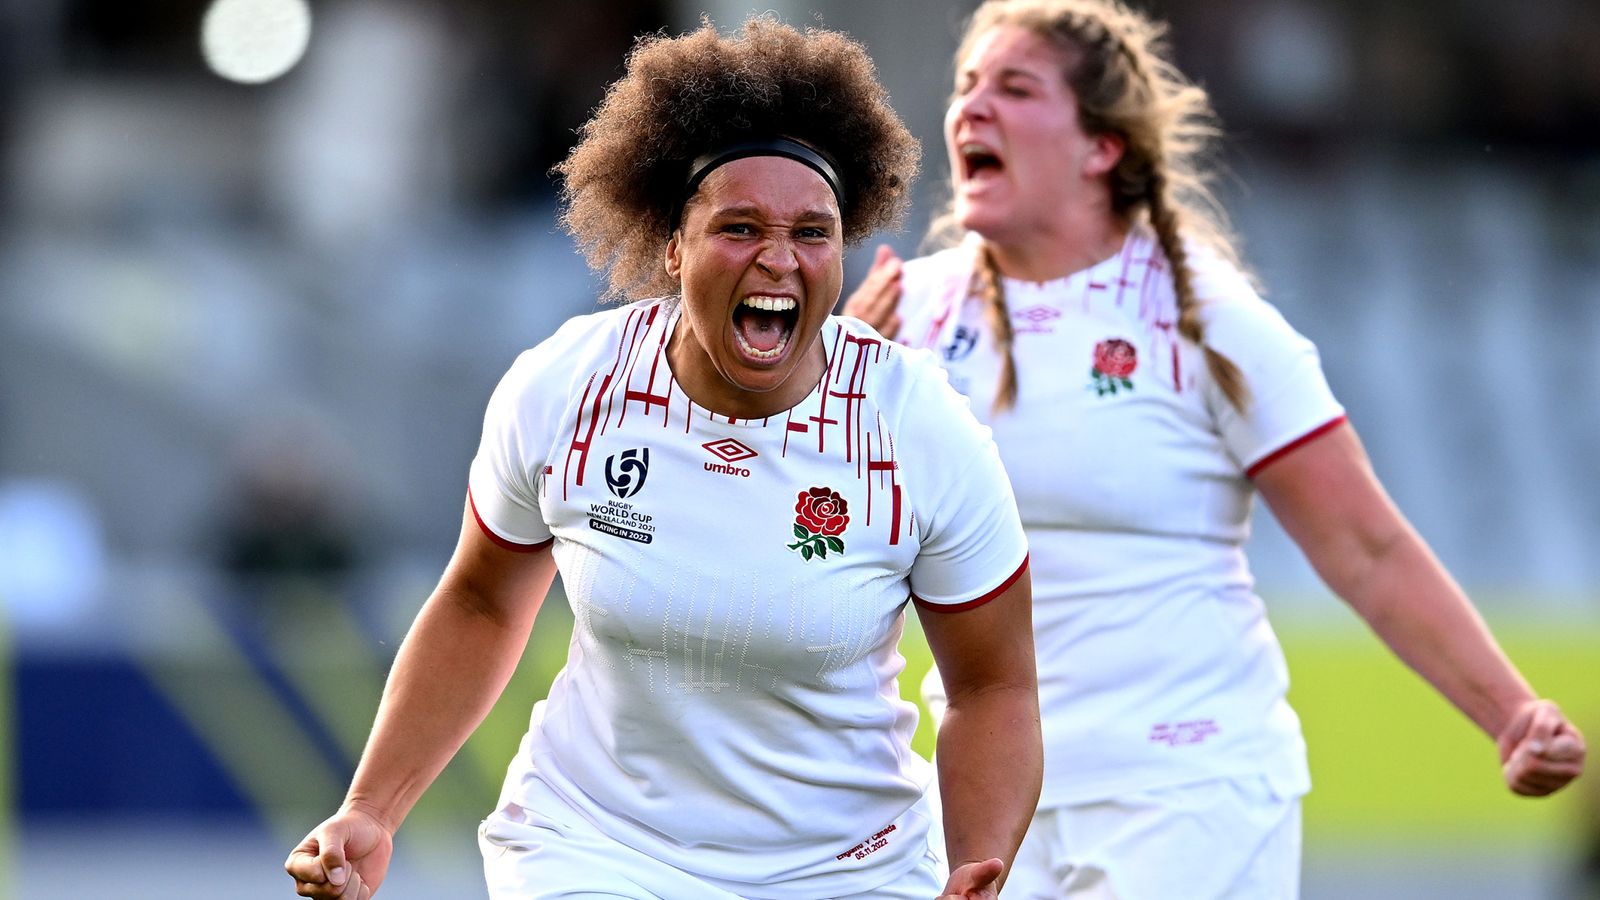 england-reach-rugby-world-cup-final-with-nail-biting-win-over-canada